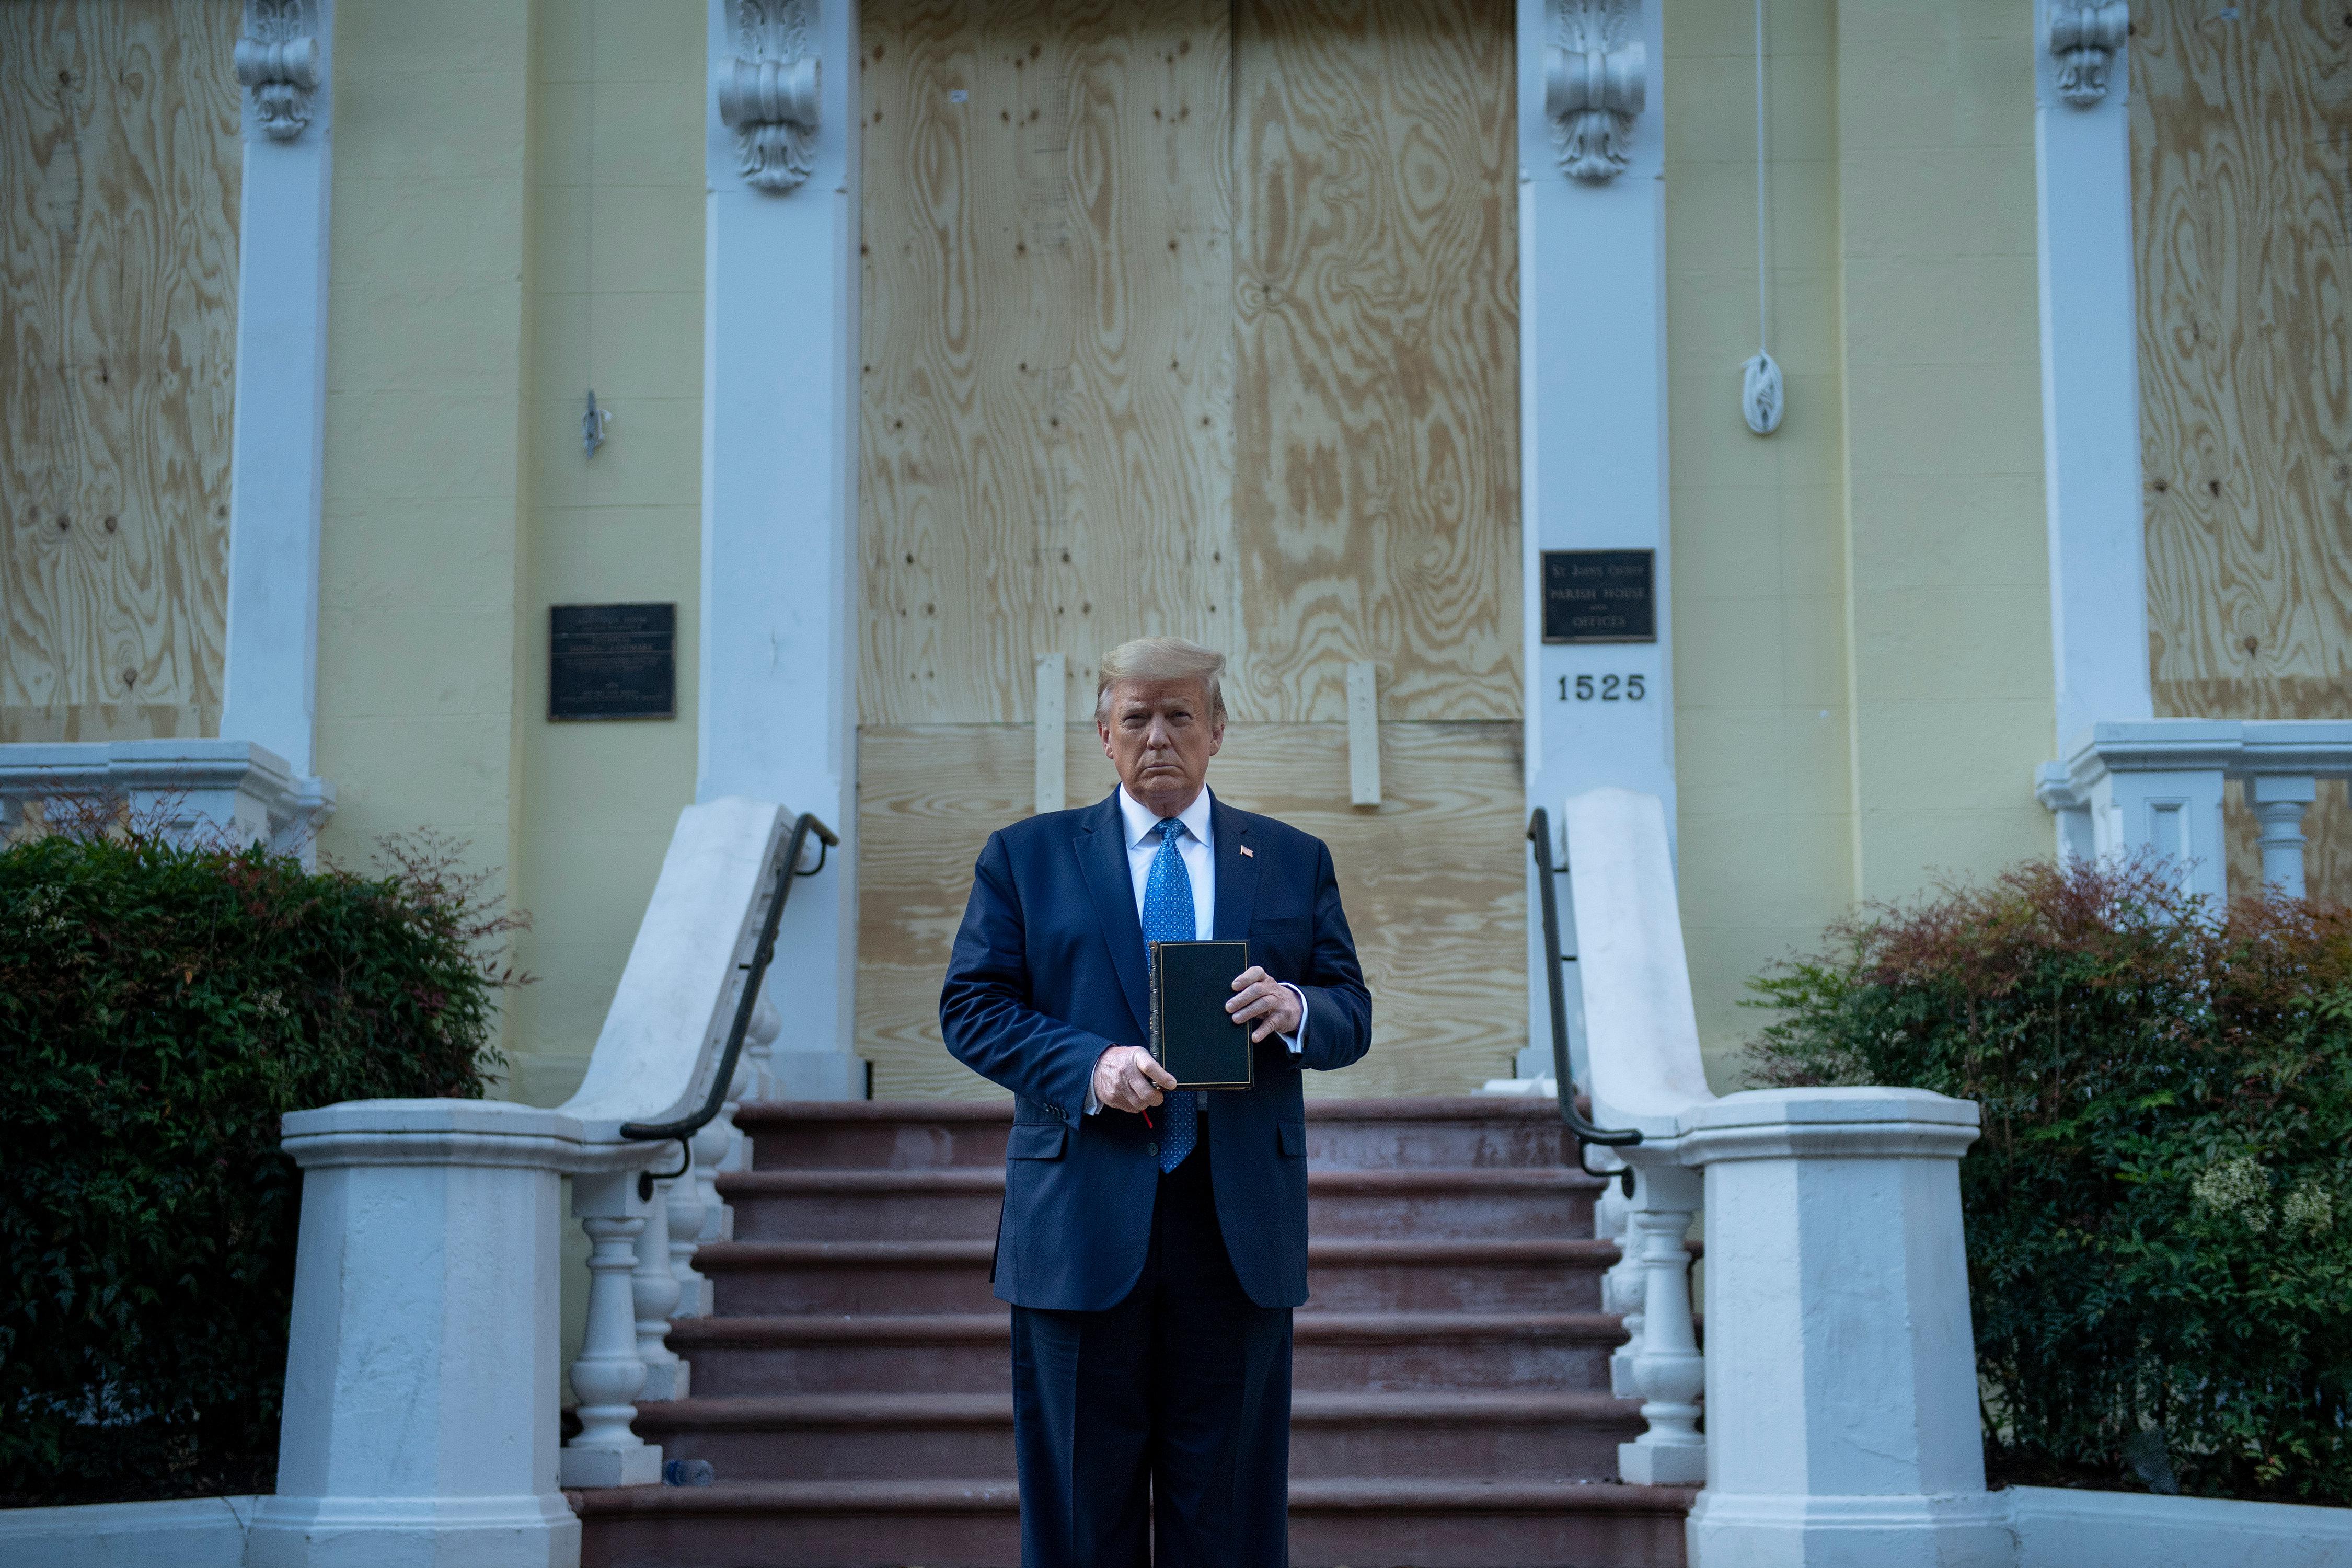 Trump holds a Bible in front of a boarded-up church